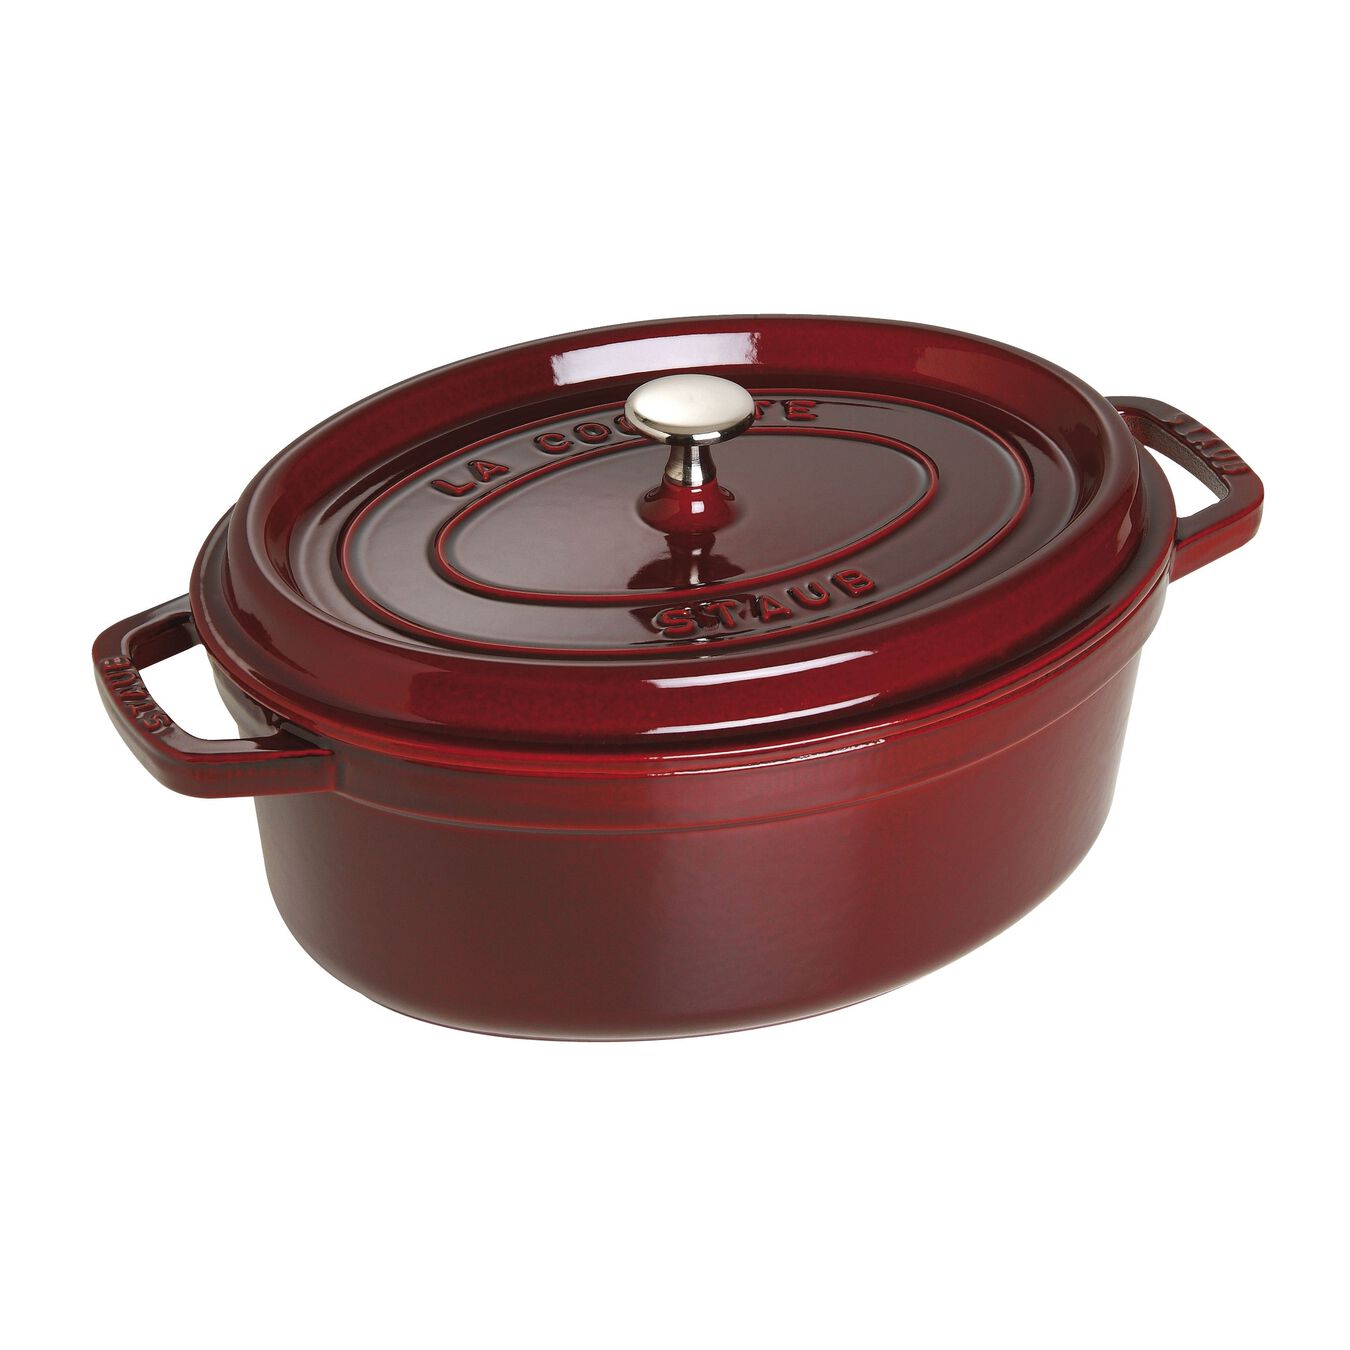 33 cm oval Cast iron Cocotte grenadine-red,,large 4